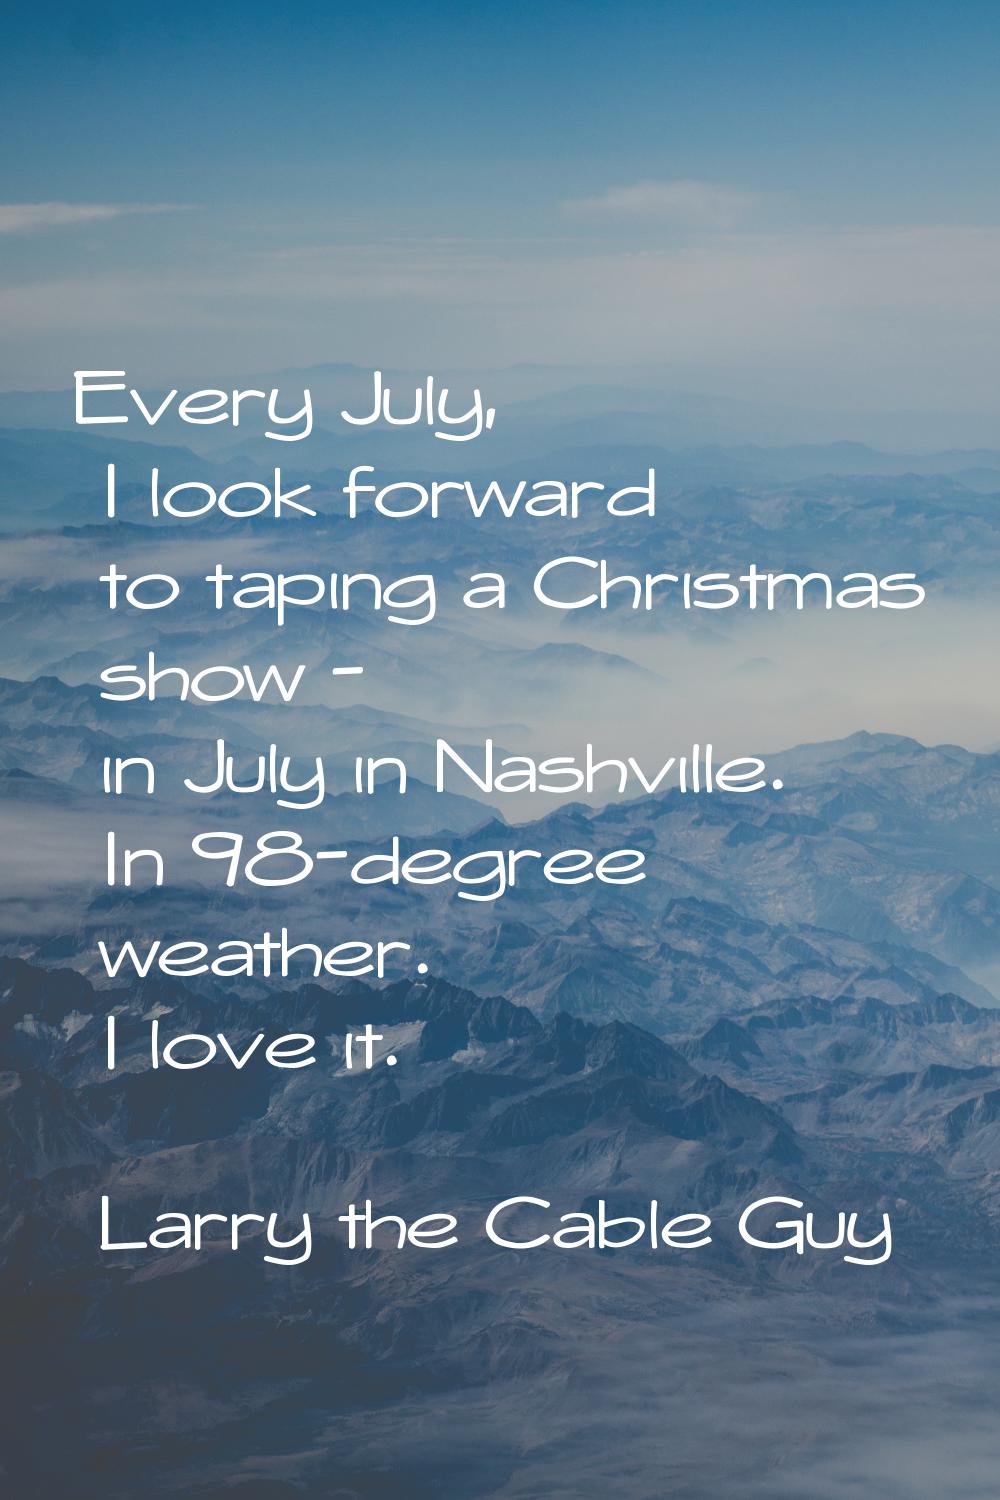 Every July, I look forward to taping a Christmas show - in July in Nashville. In 98-degree weather.